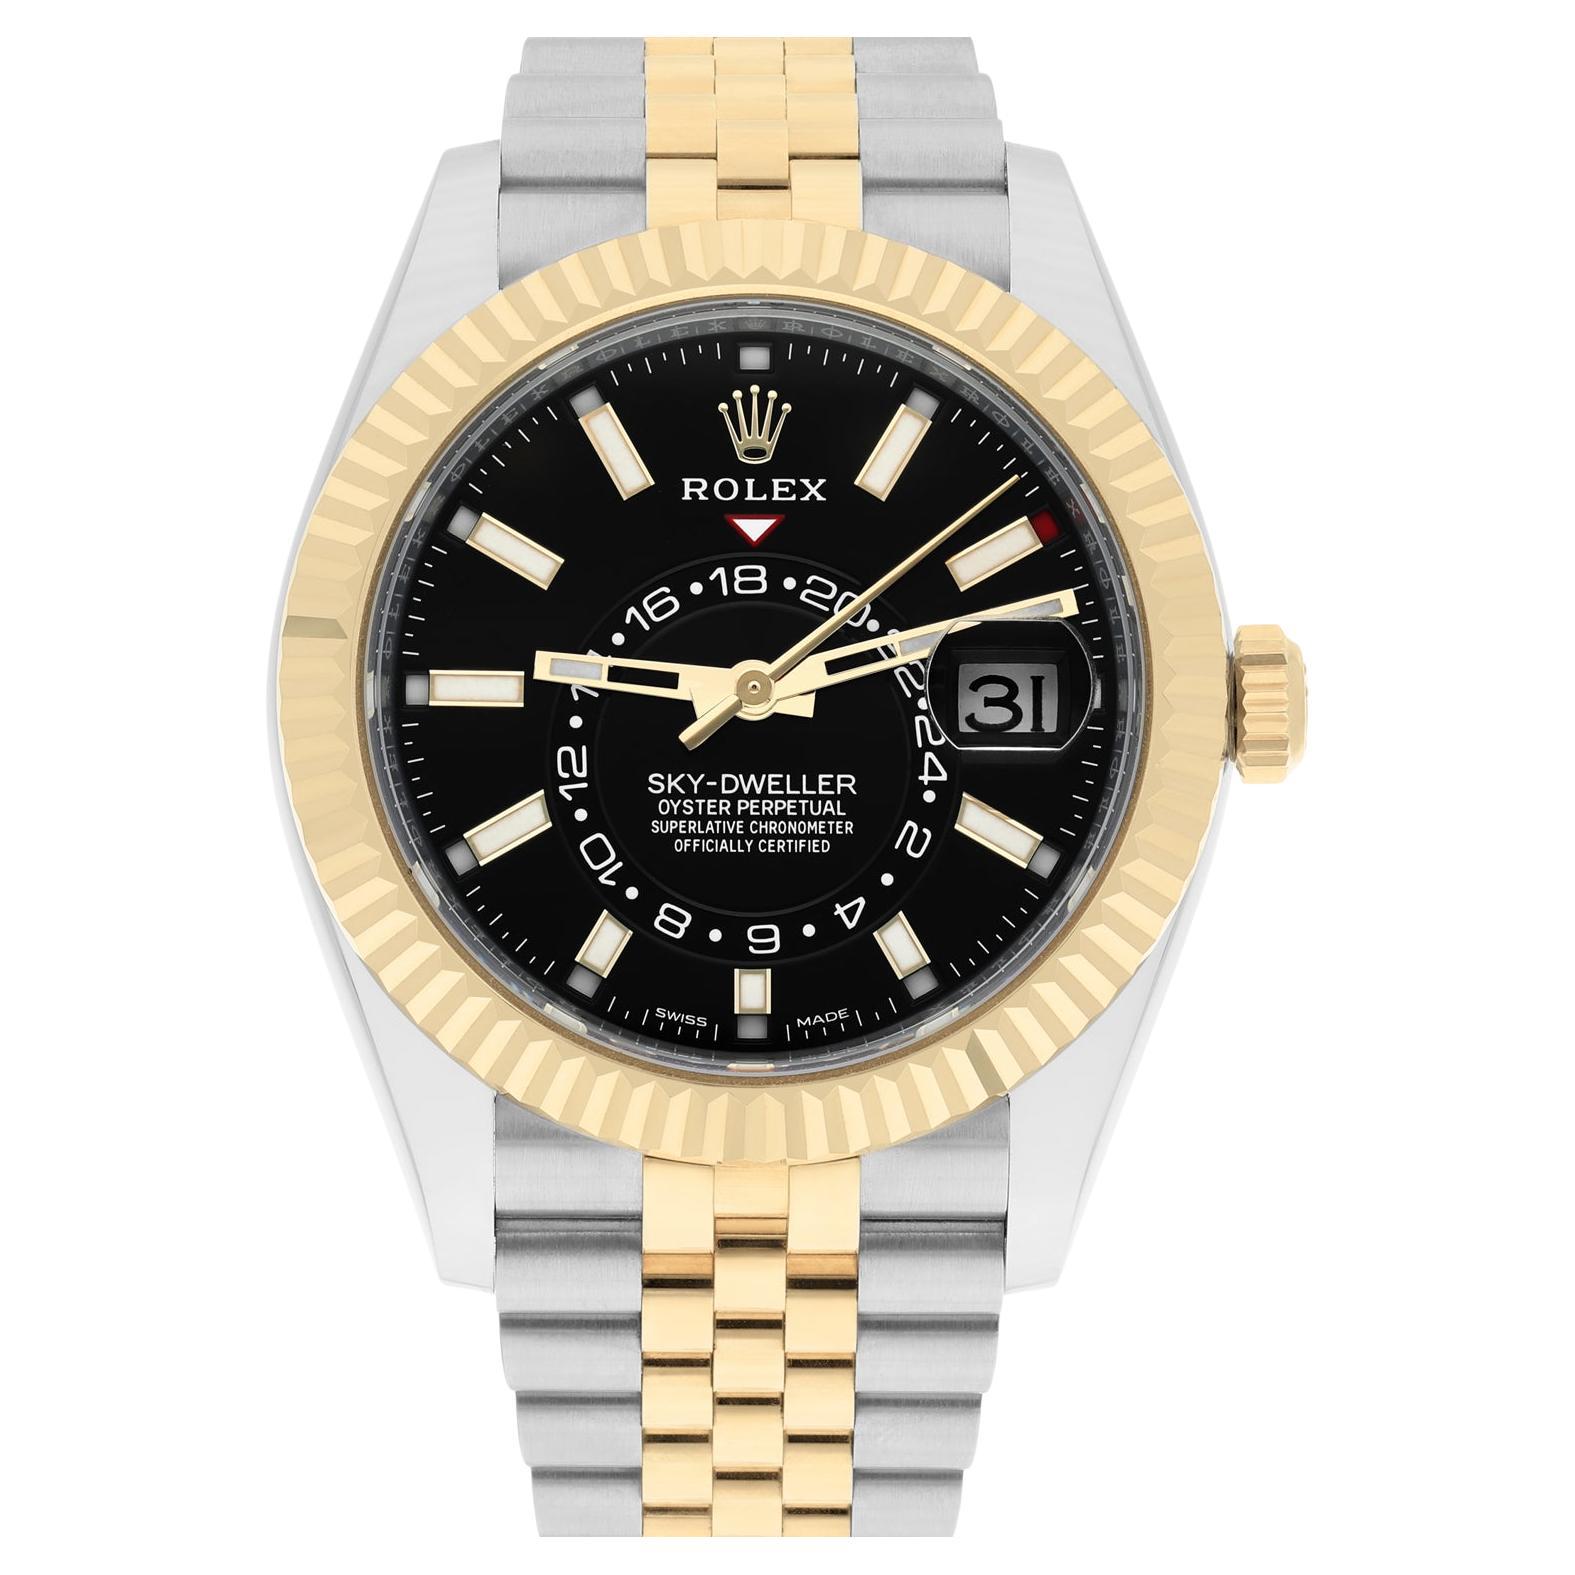 Does a Rolex watch hold its value?